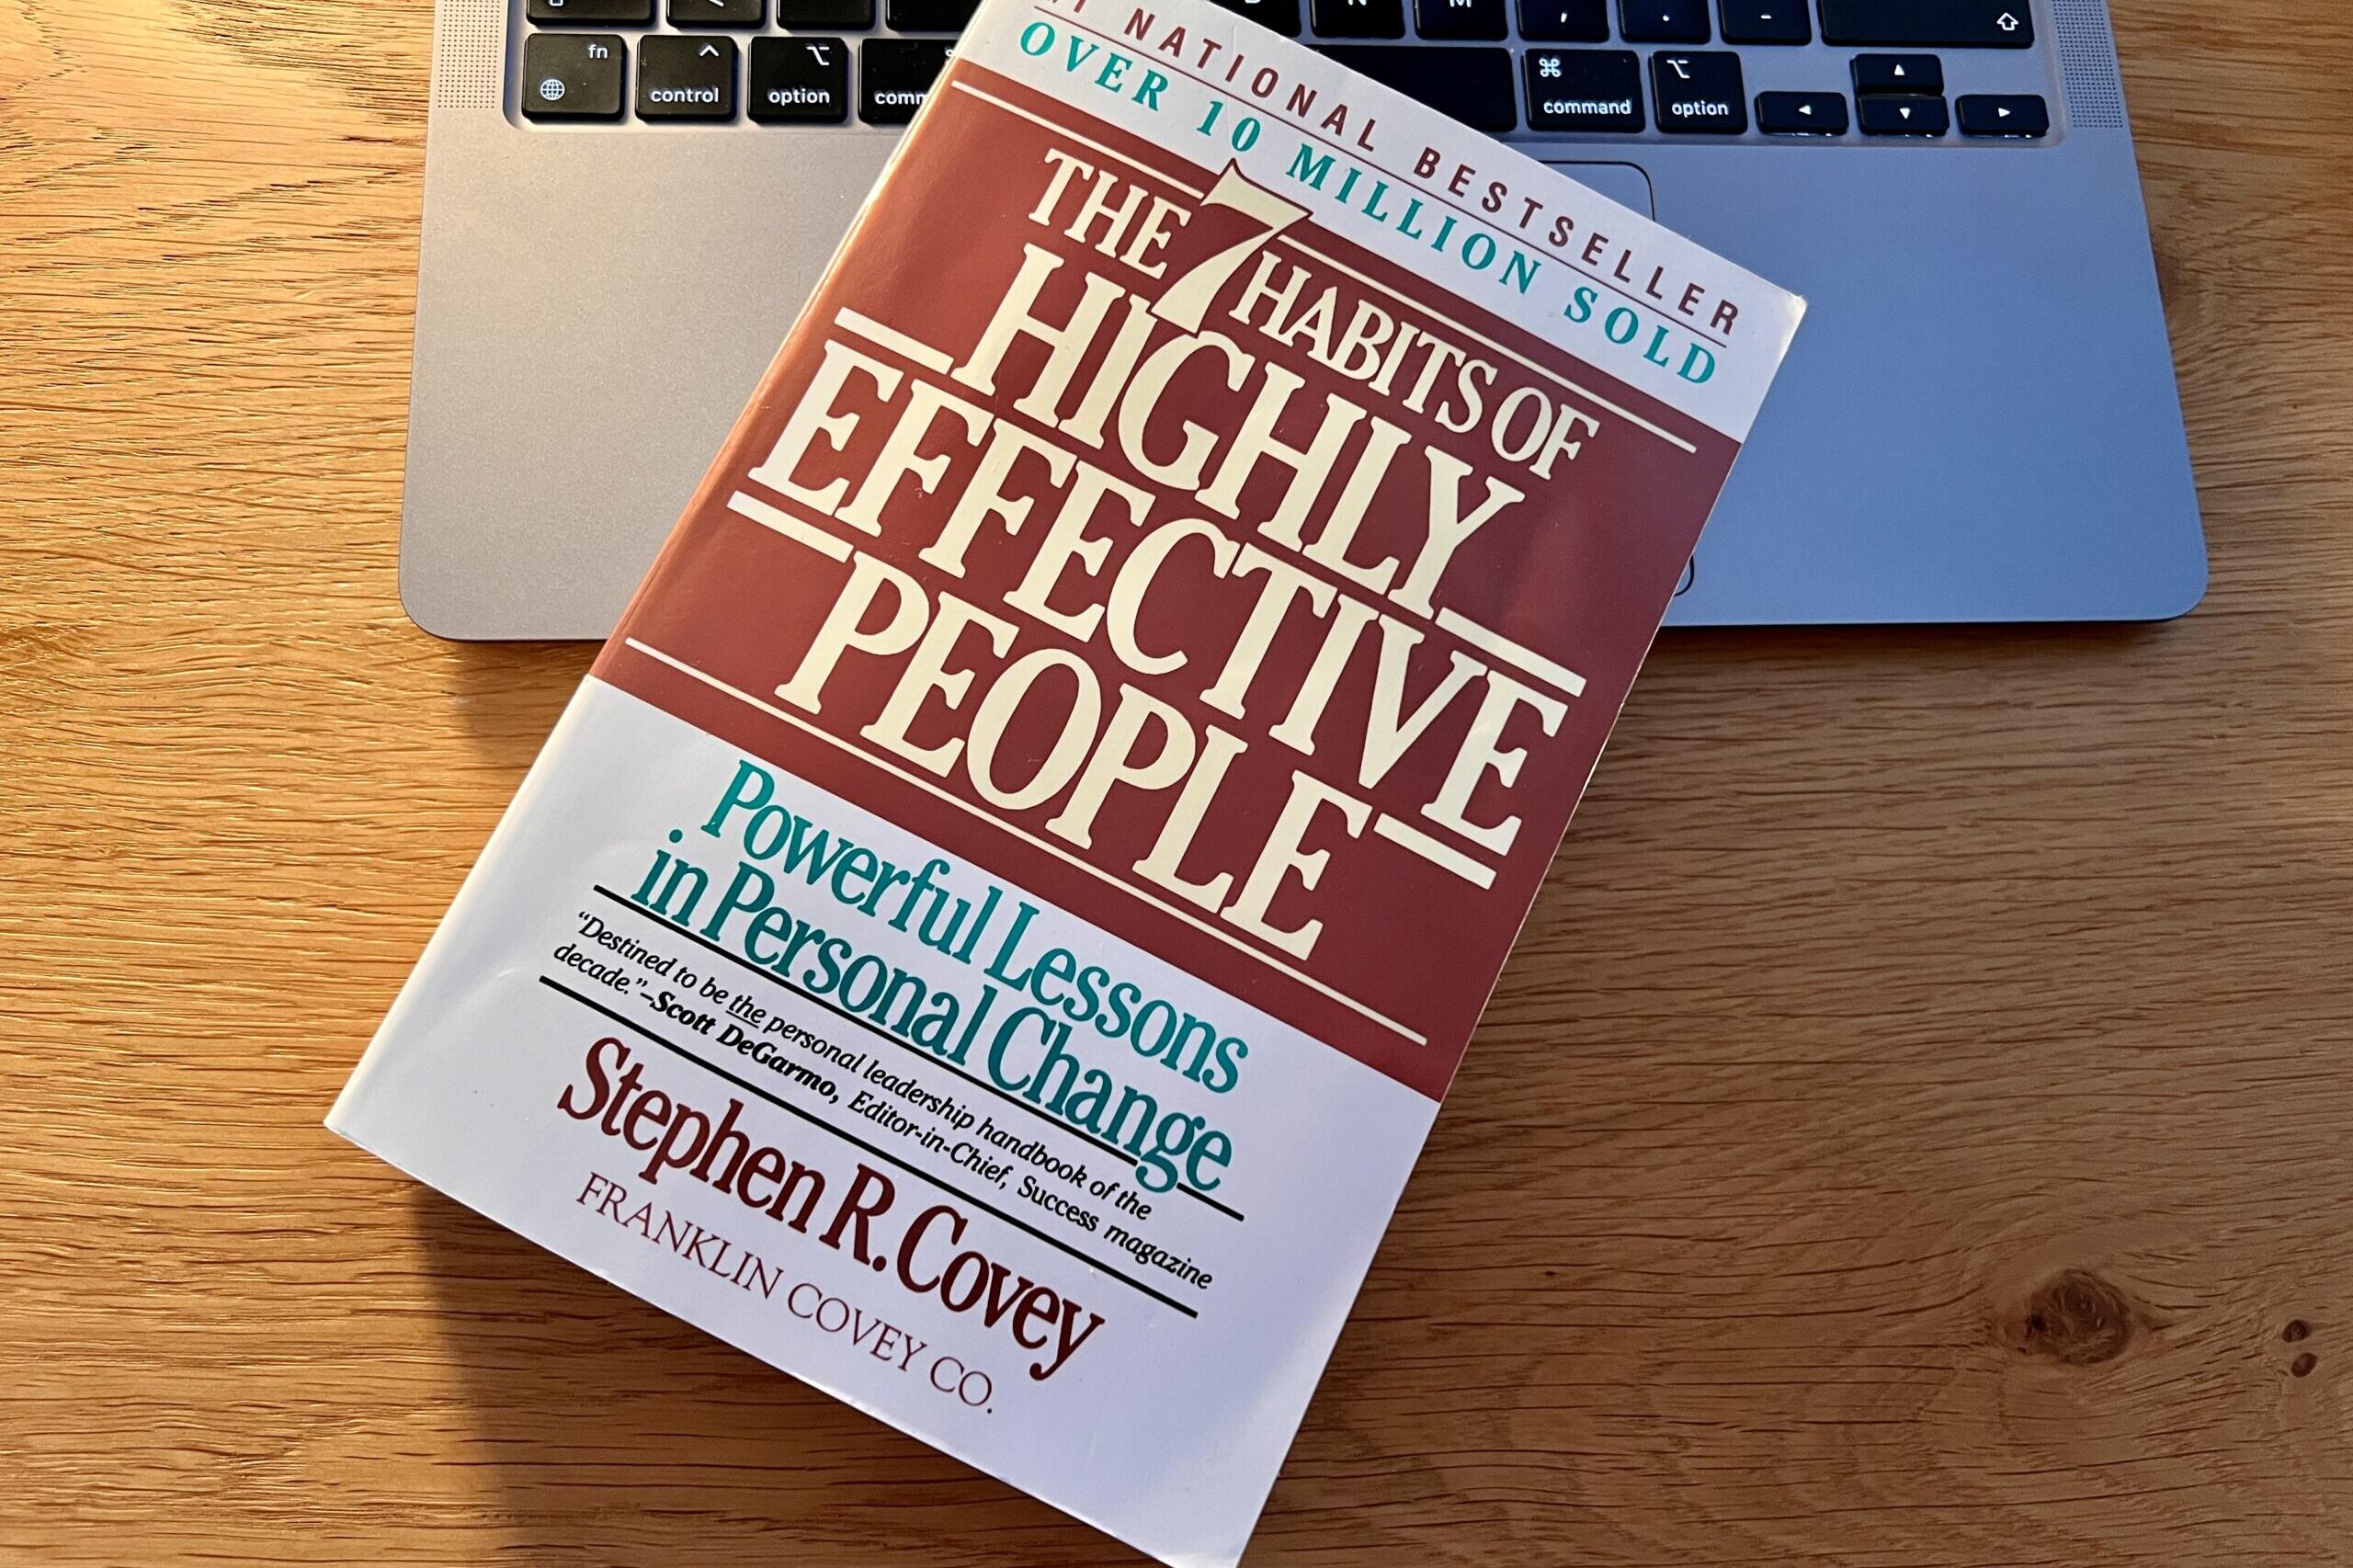 The 7 Habits of Highly Effective People von Stephen R. Covey